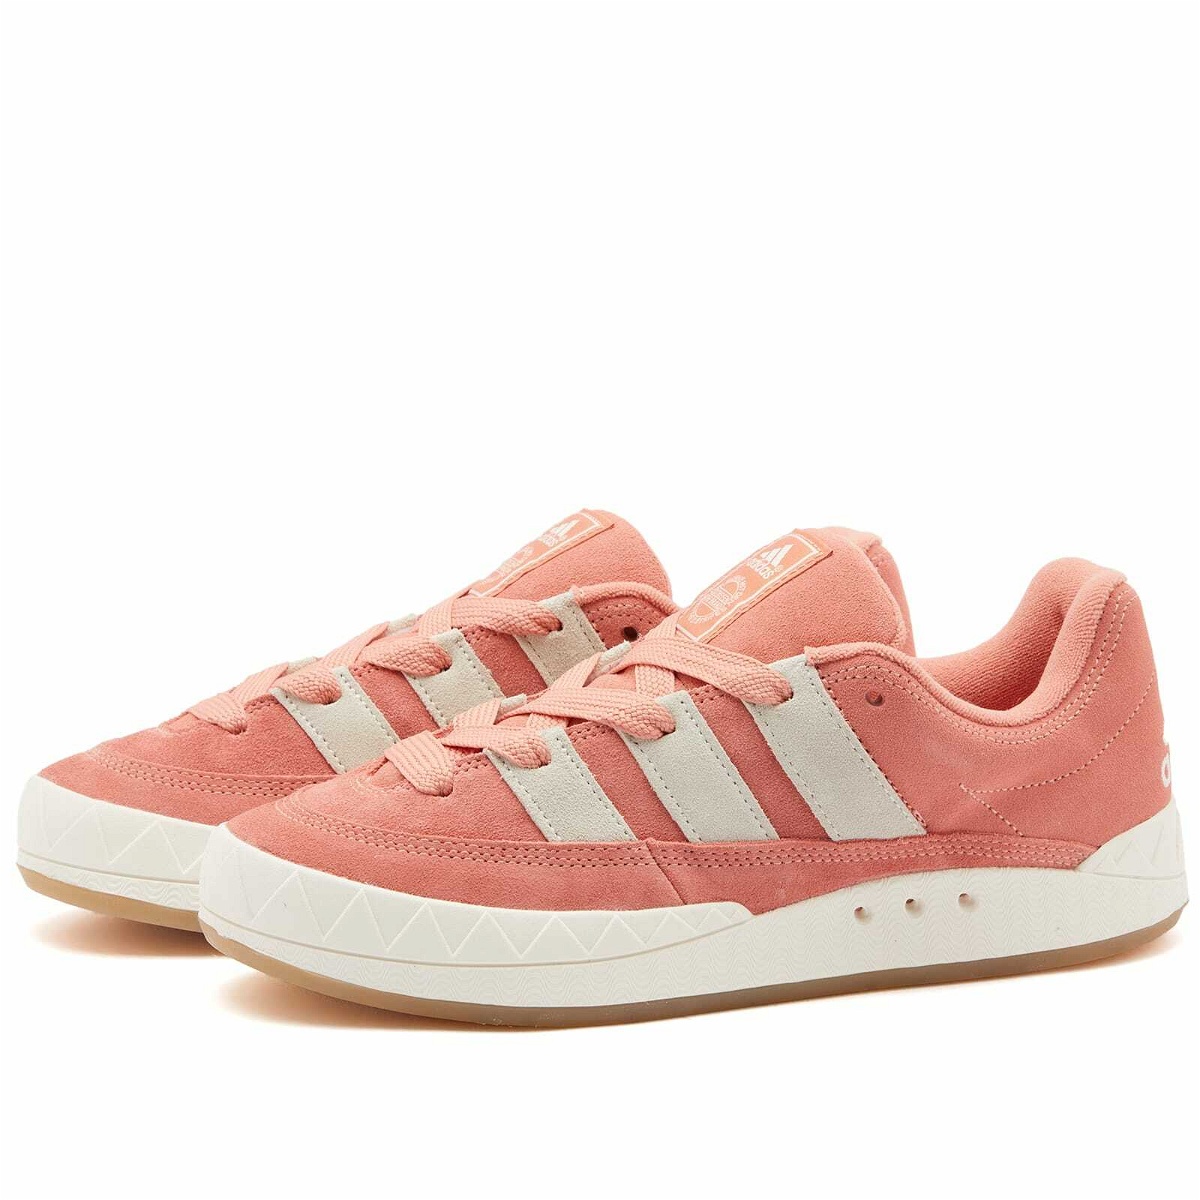 Adidas Adimatic Sneakers in Clay/Off White/Gum adidas